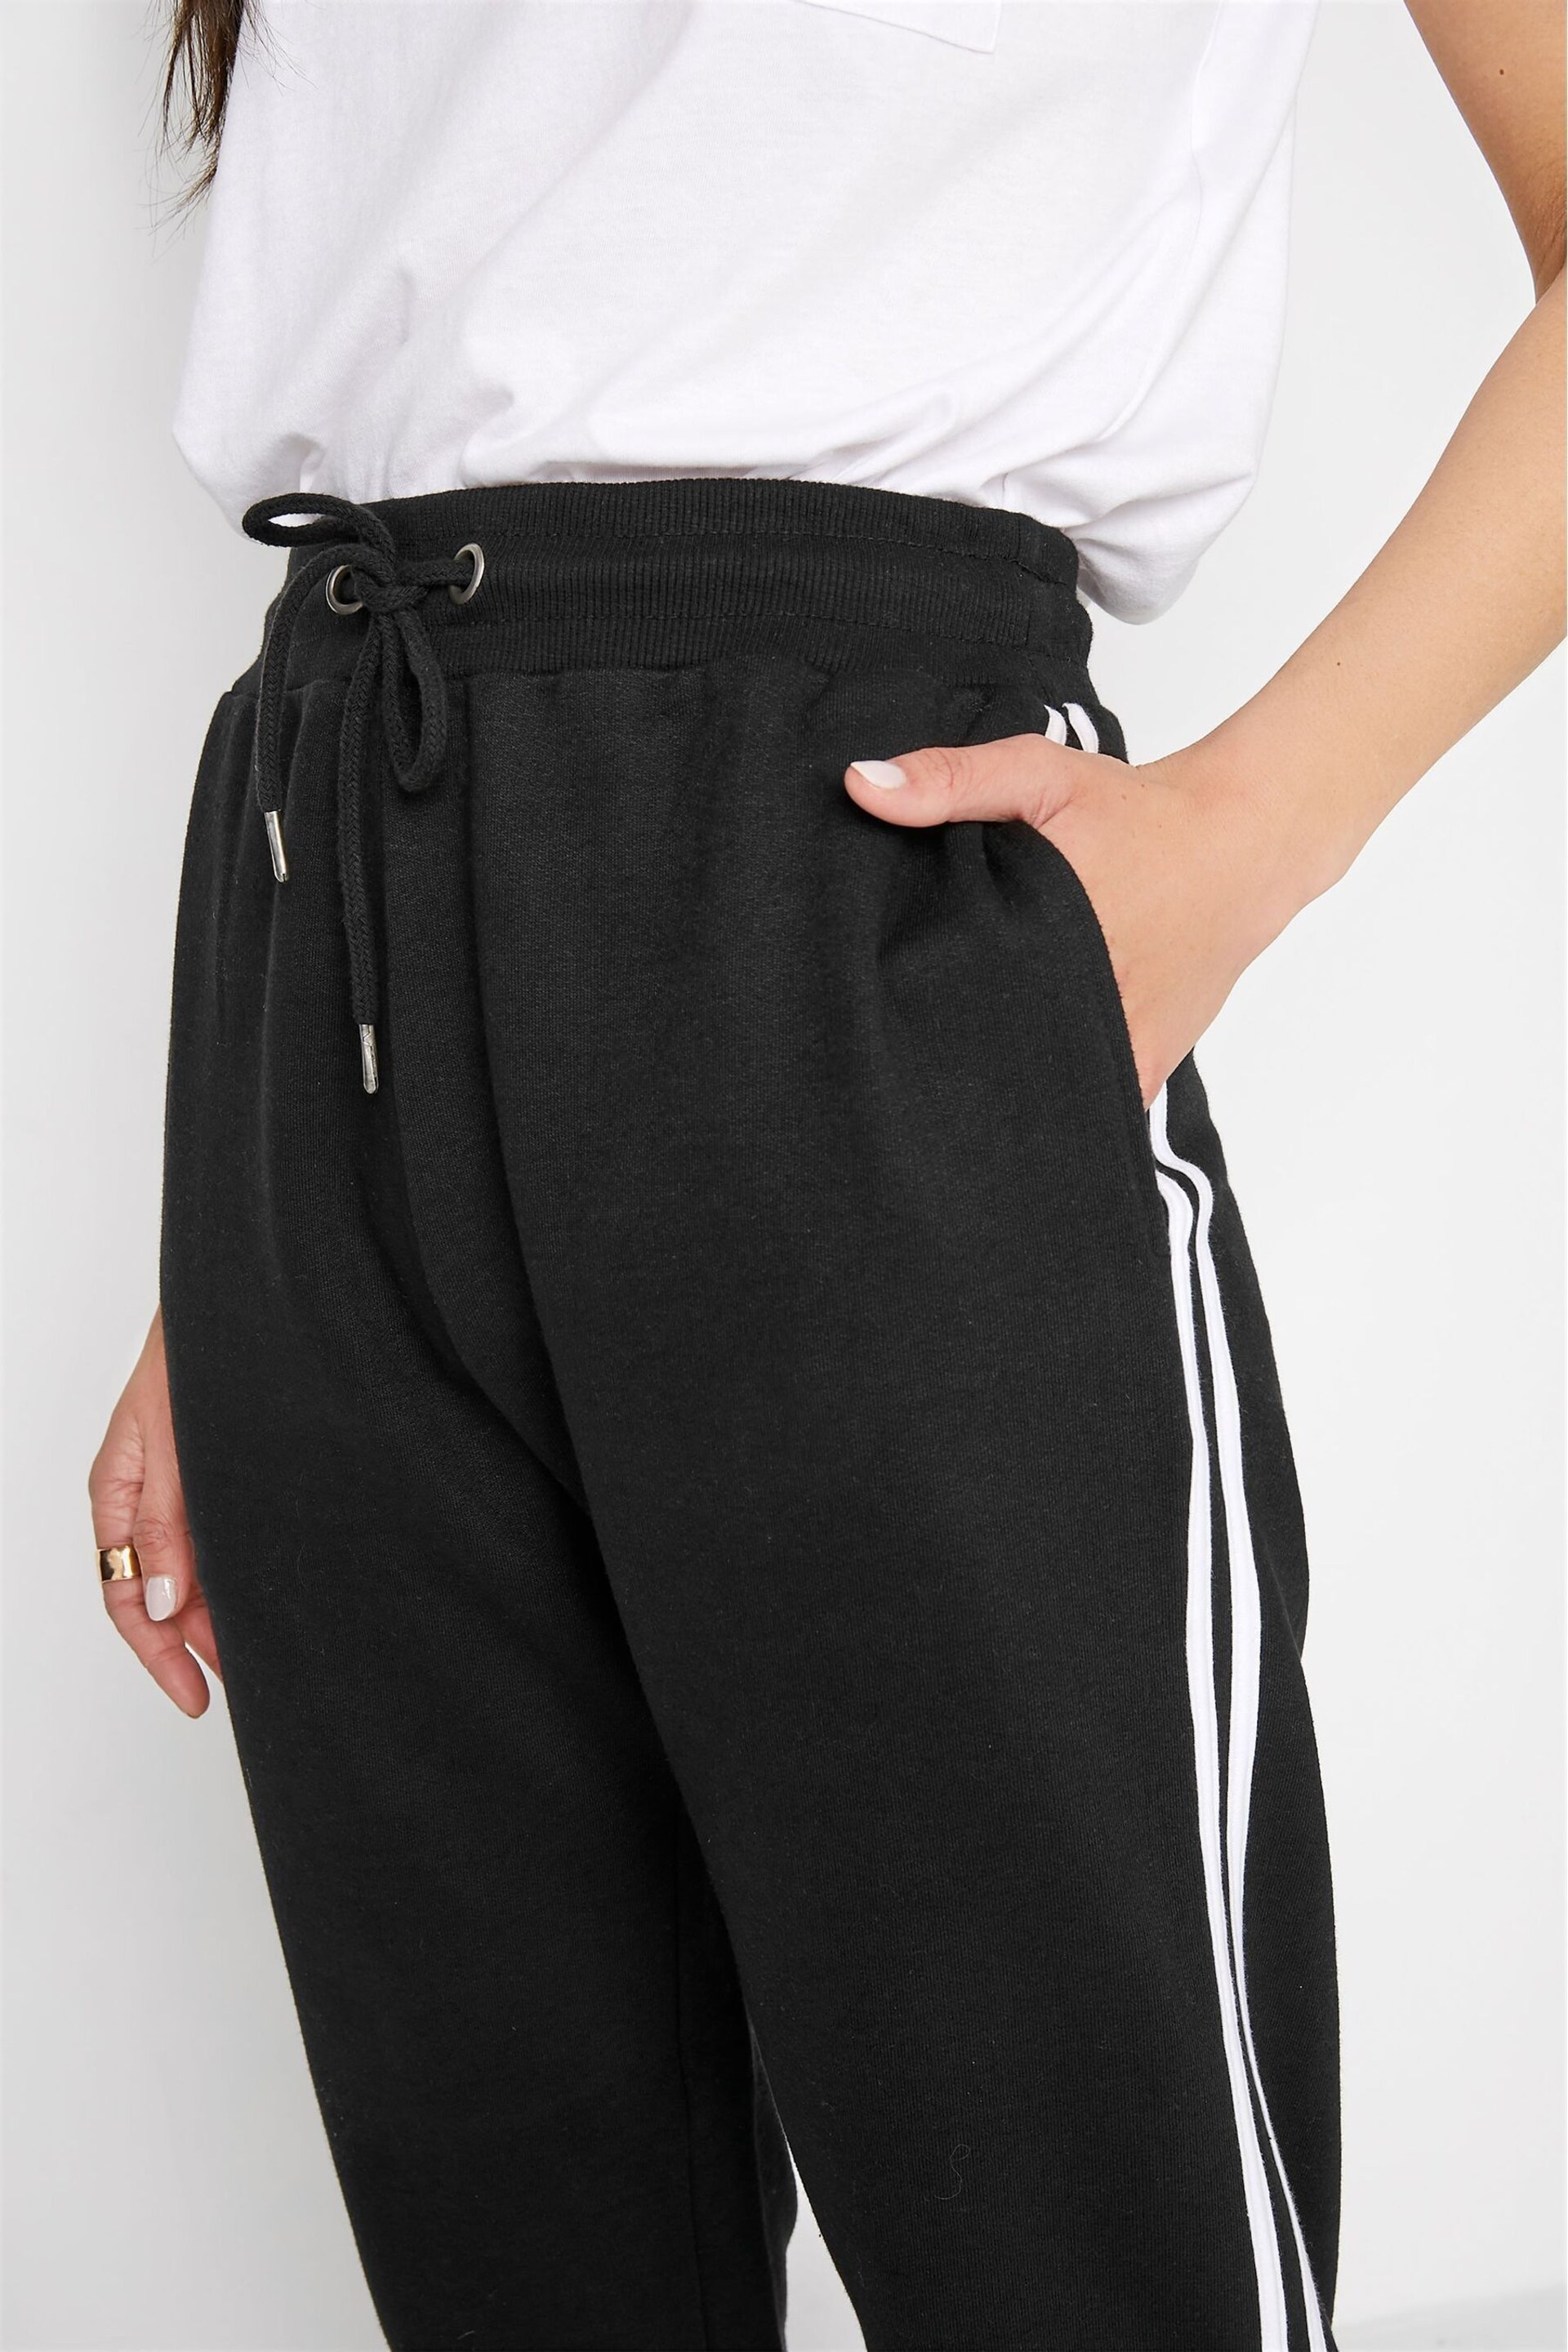 Long Tall Sally Black Side Stripe Stretch Joggers - Image 4 of 4